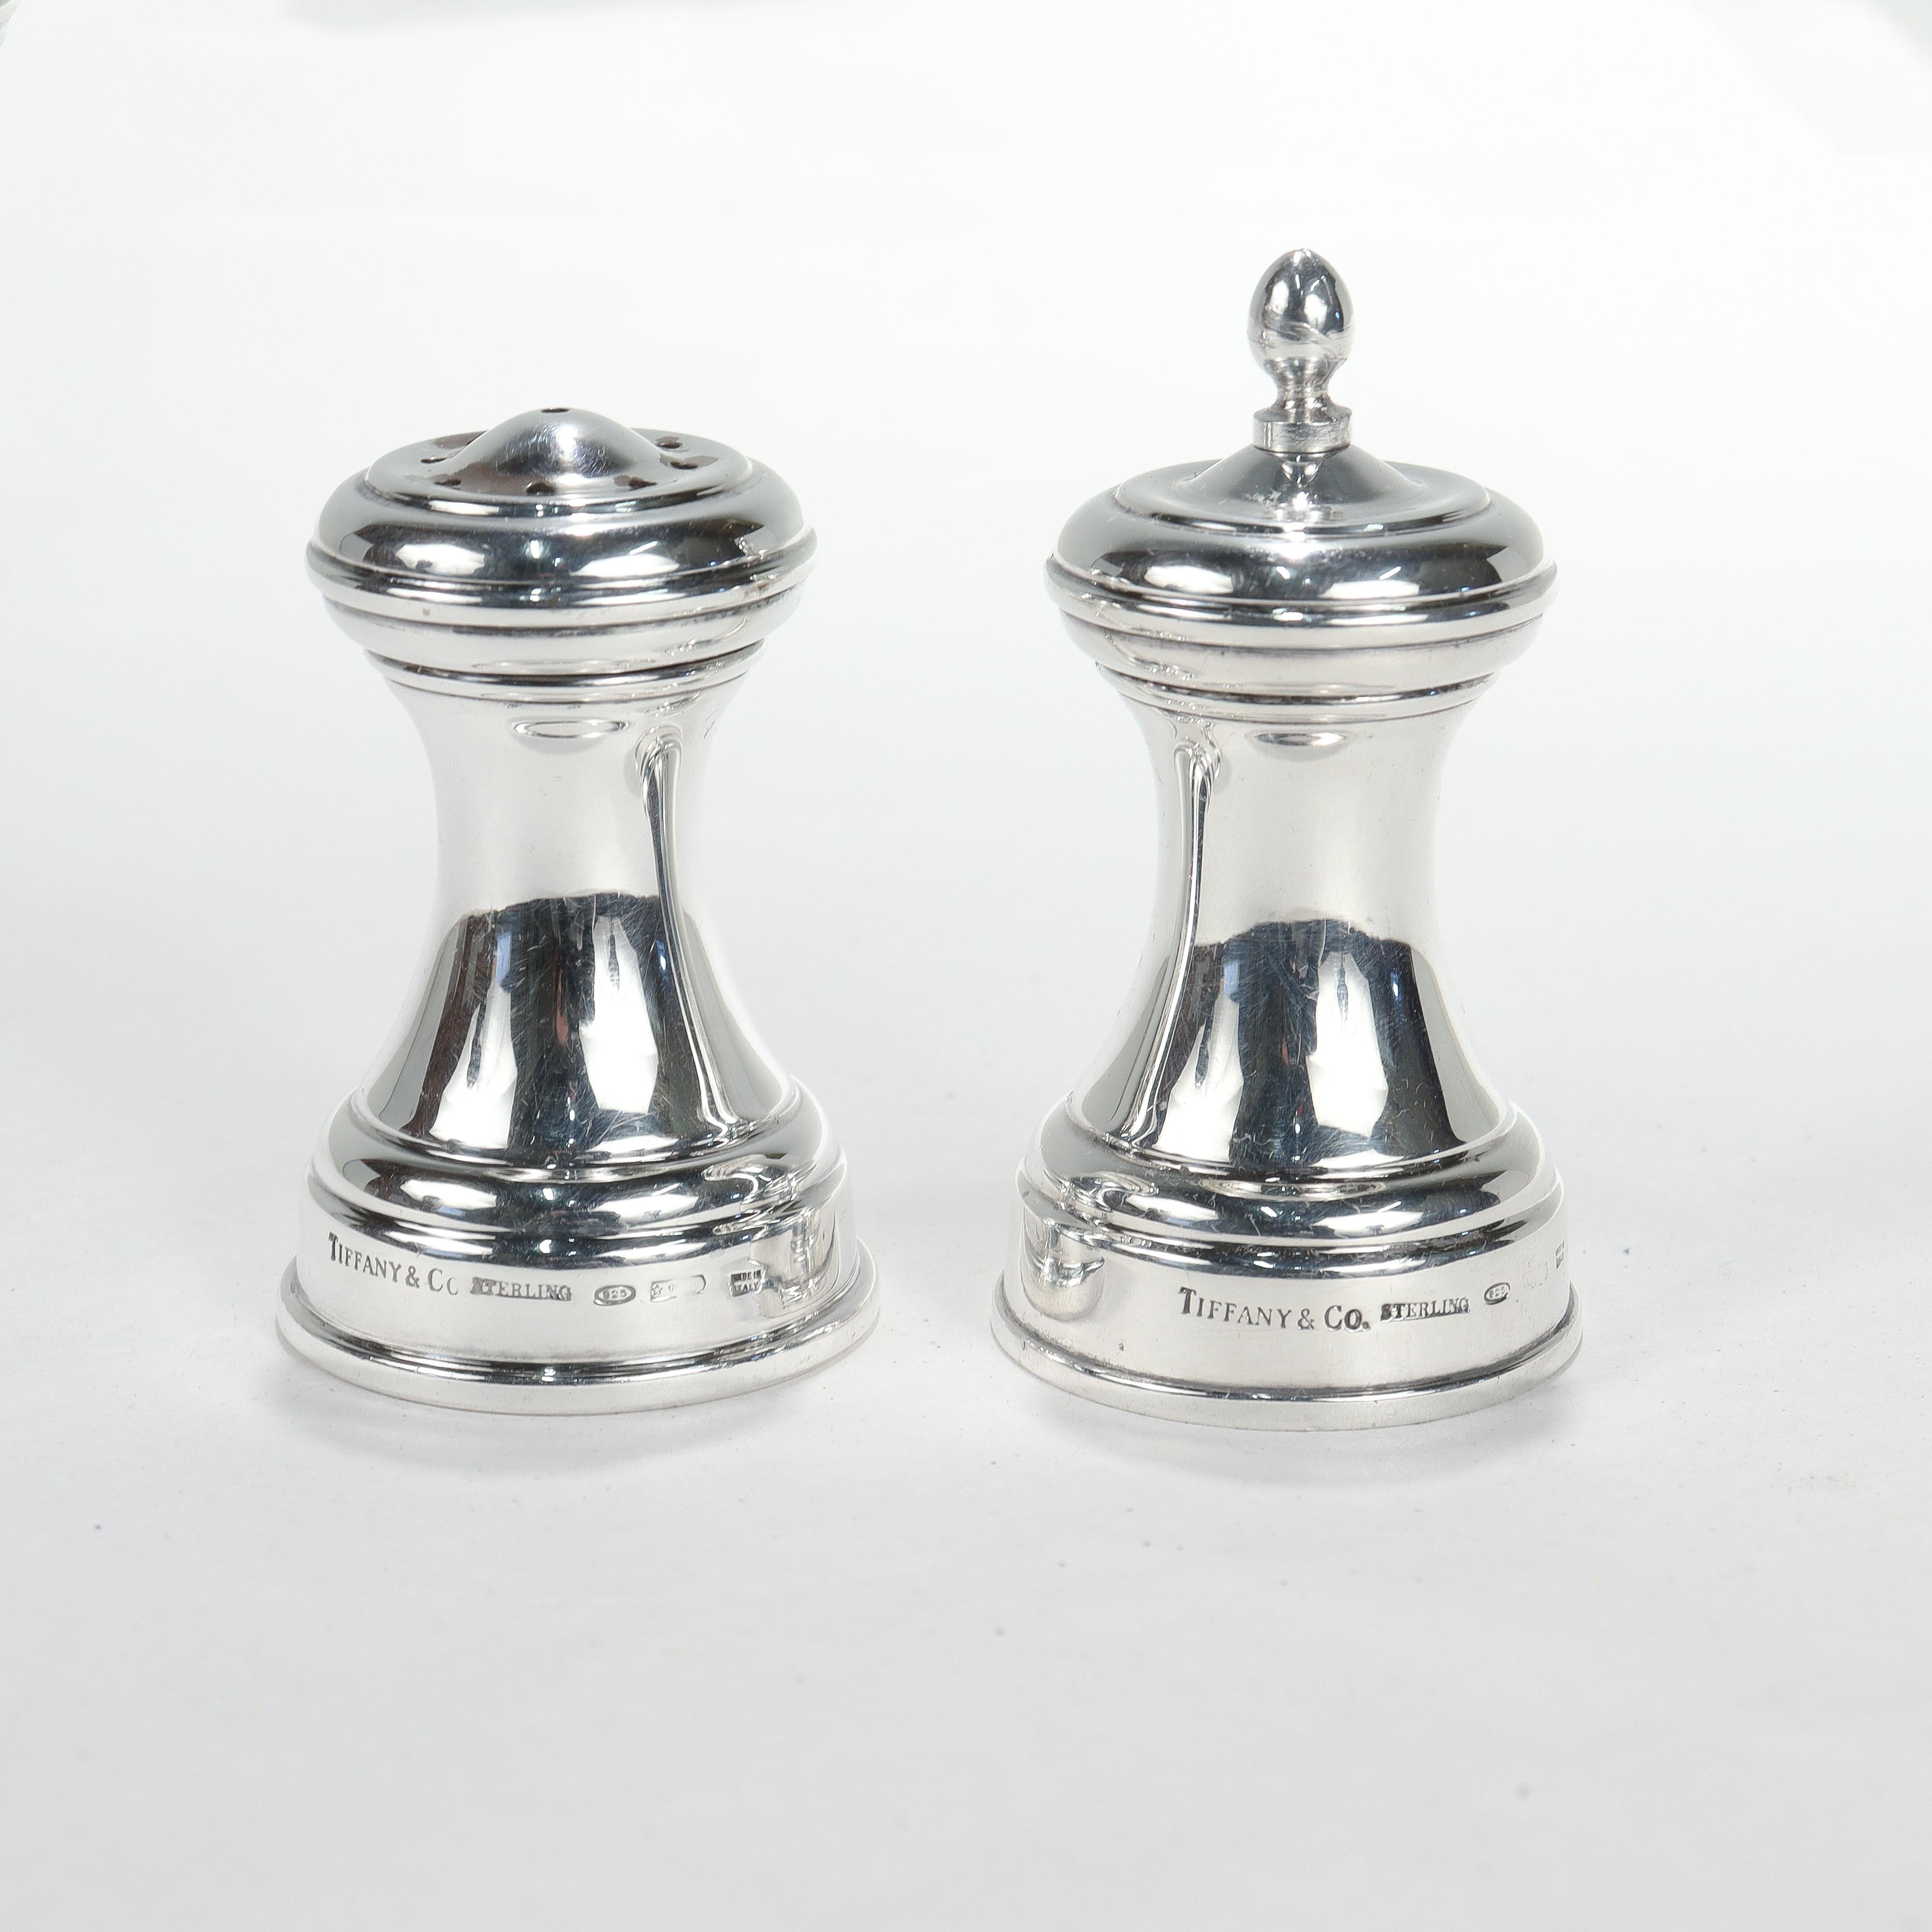 A fine pair of silver salt and pepper shakers.

By Tiffany & Co.

In sterling silver.

In the Capstan pattern. 

The salt shaker is stamped Tiffany & Co. / Sterling / 925 / Made in Italy / and with Italian hallmarks. The pepper grinder is marked to